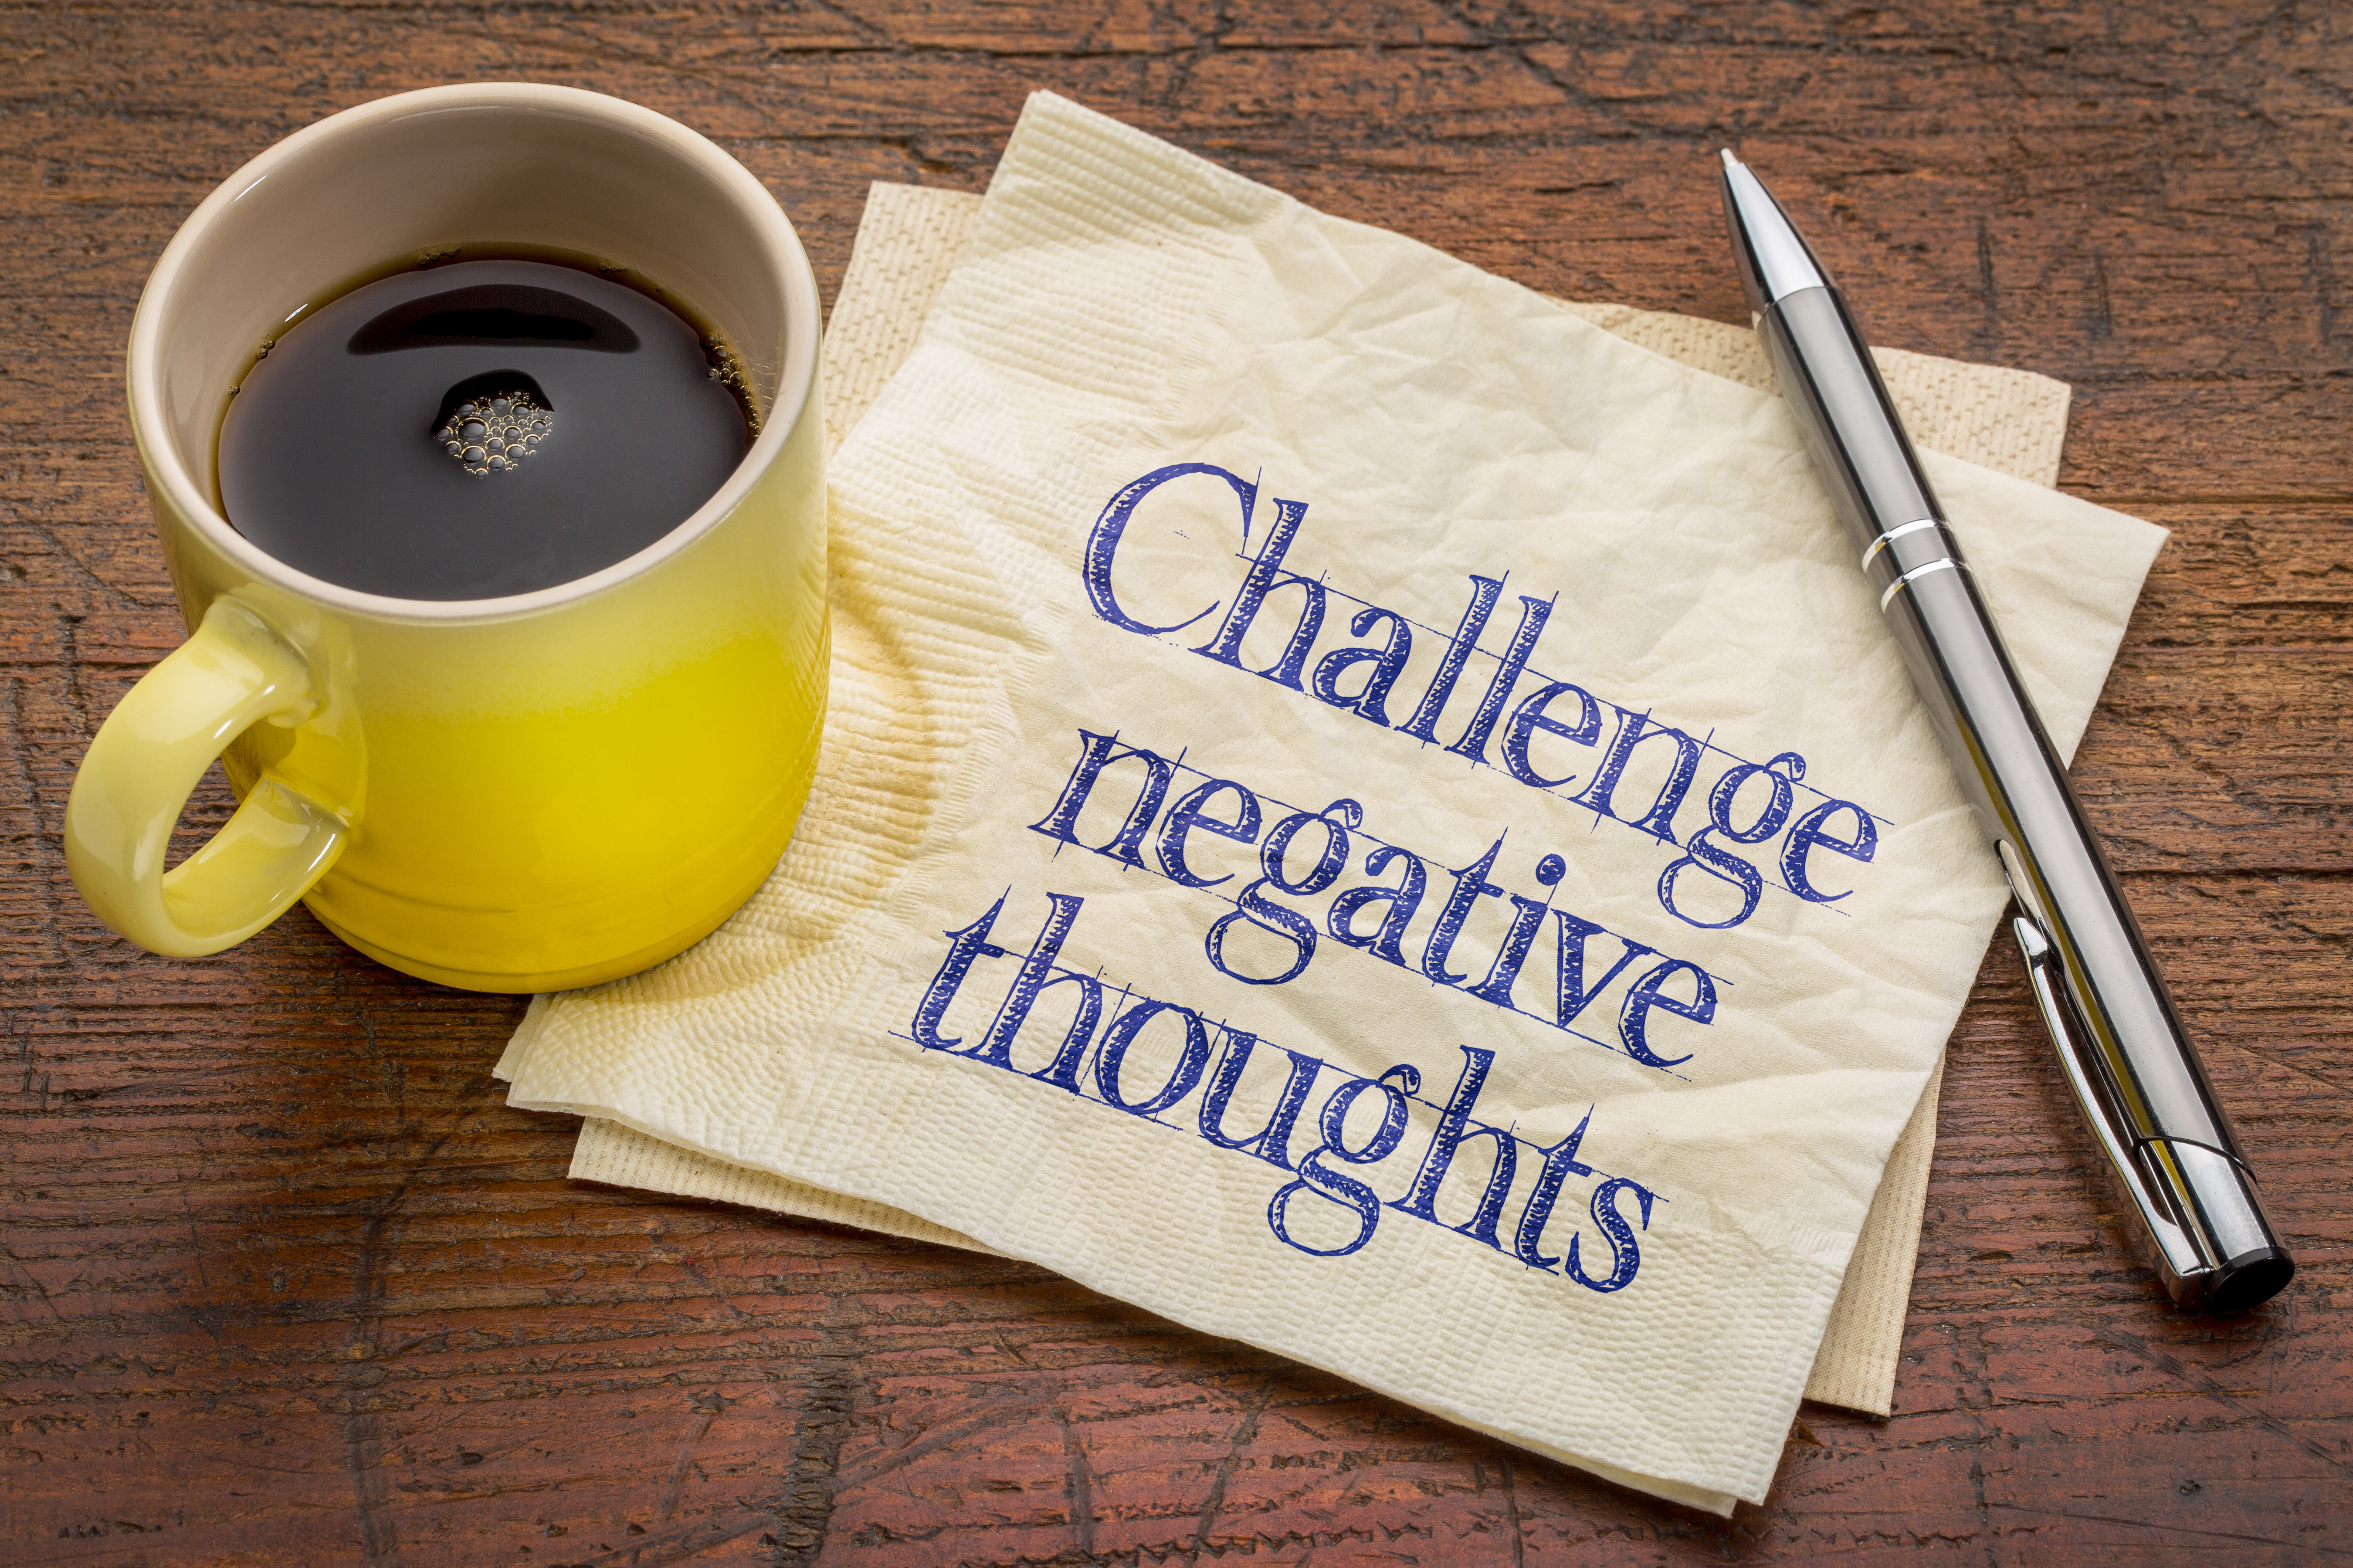 7 strategies to overcome negative thinking in your teams - Quiver Management